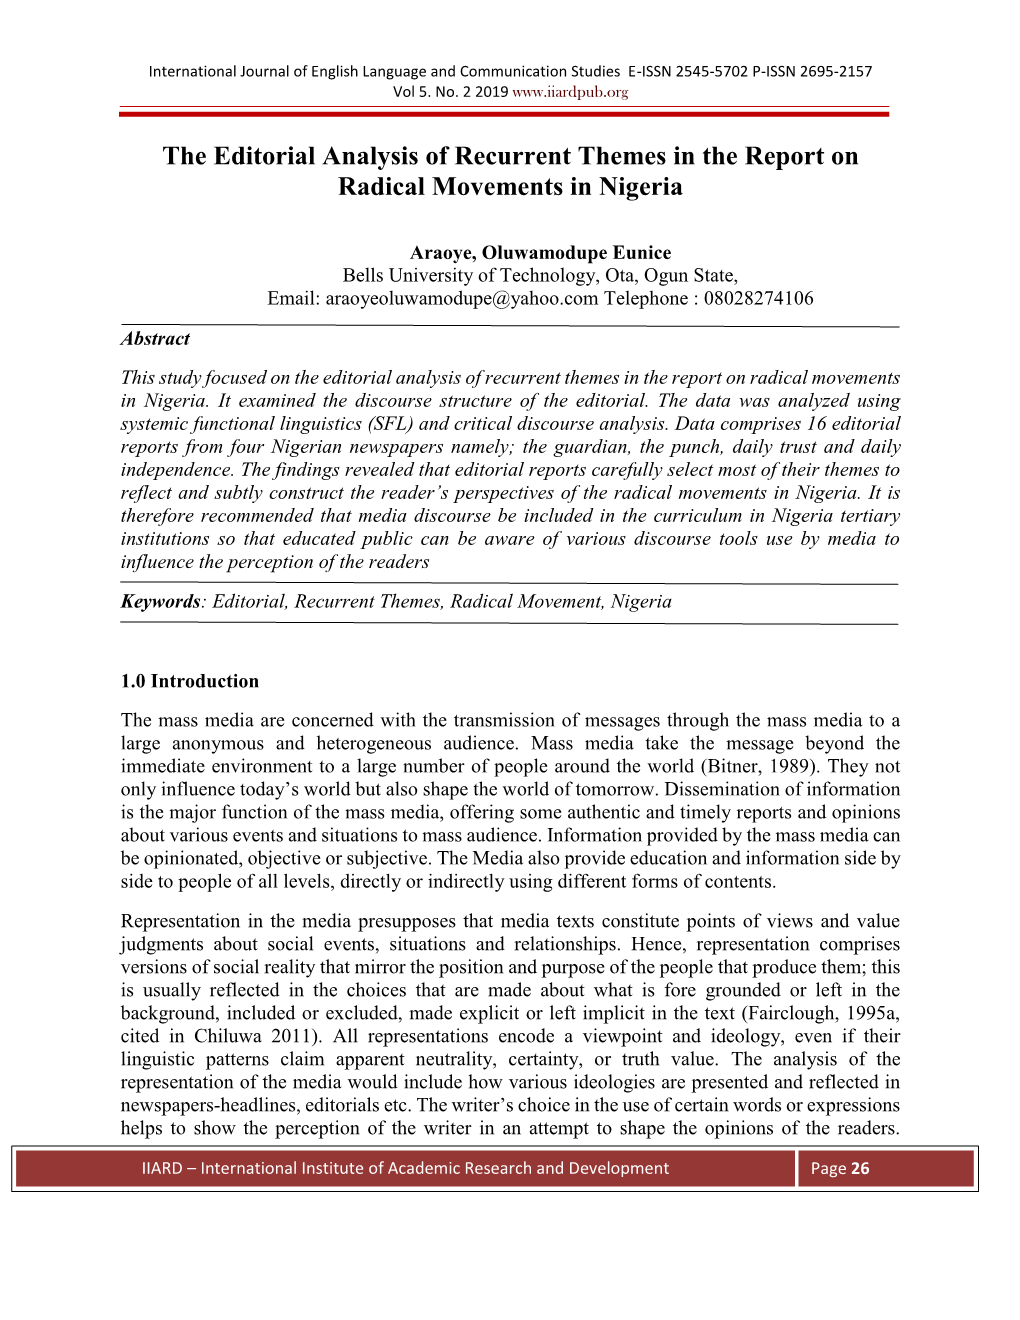 The Editorial Analysis of Recurrent Themes in the Report on Radical Movements in Nigeria